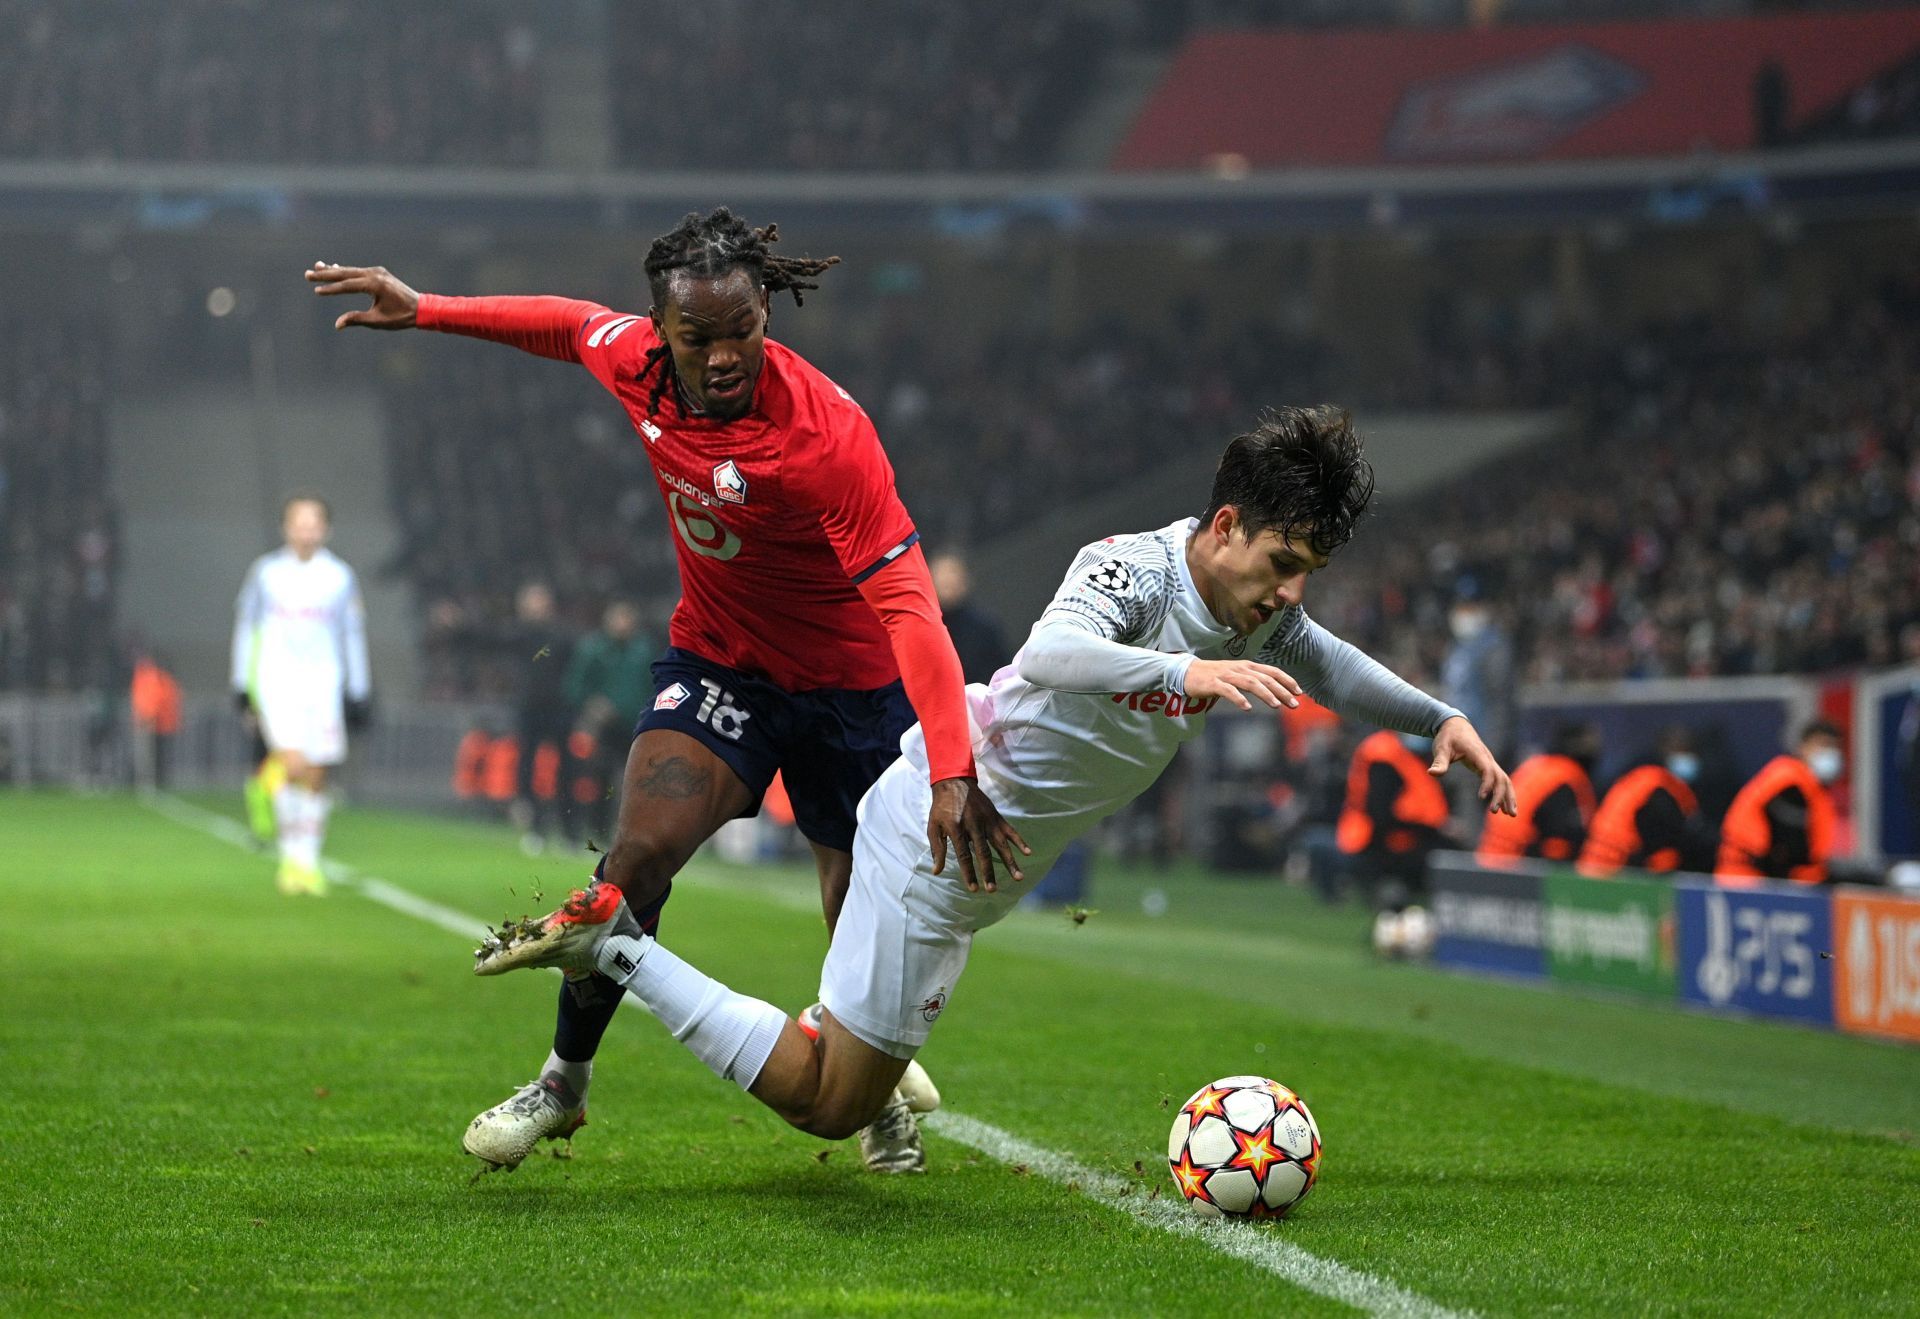 Renato Sanches (left) in action for LOSC Lille.